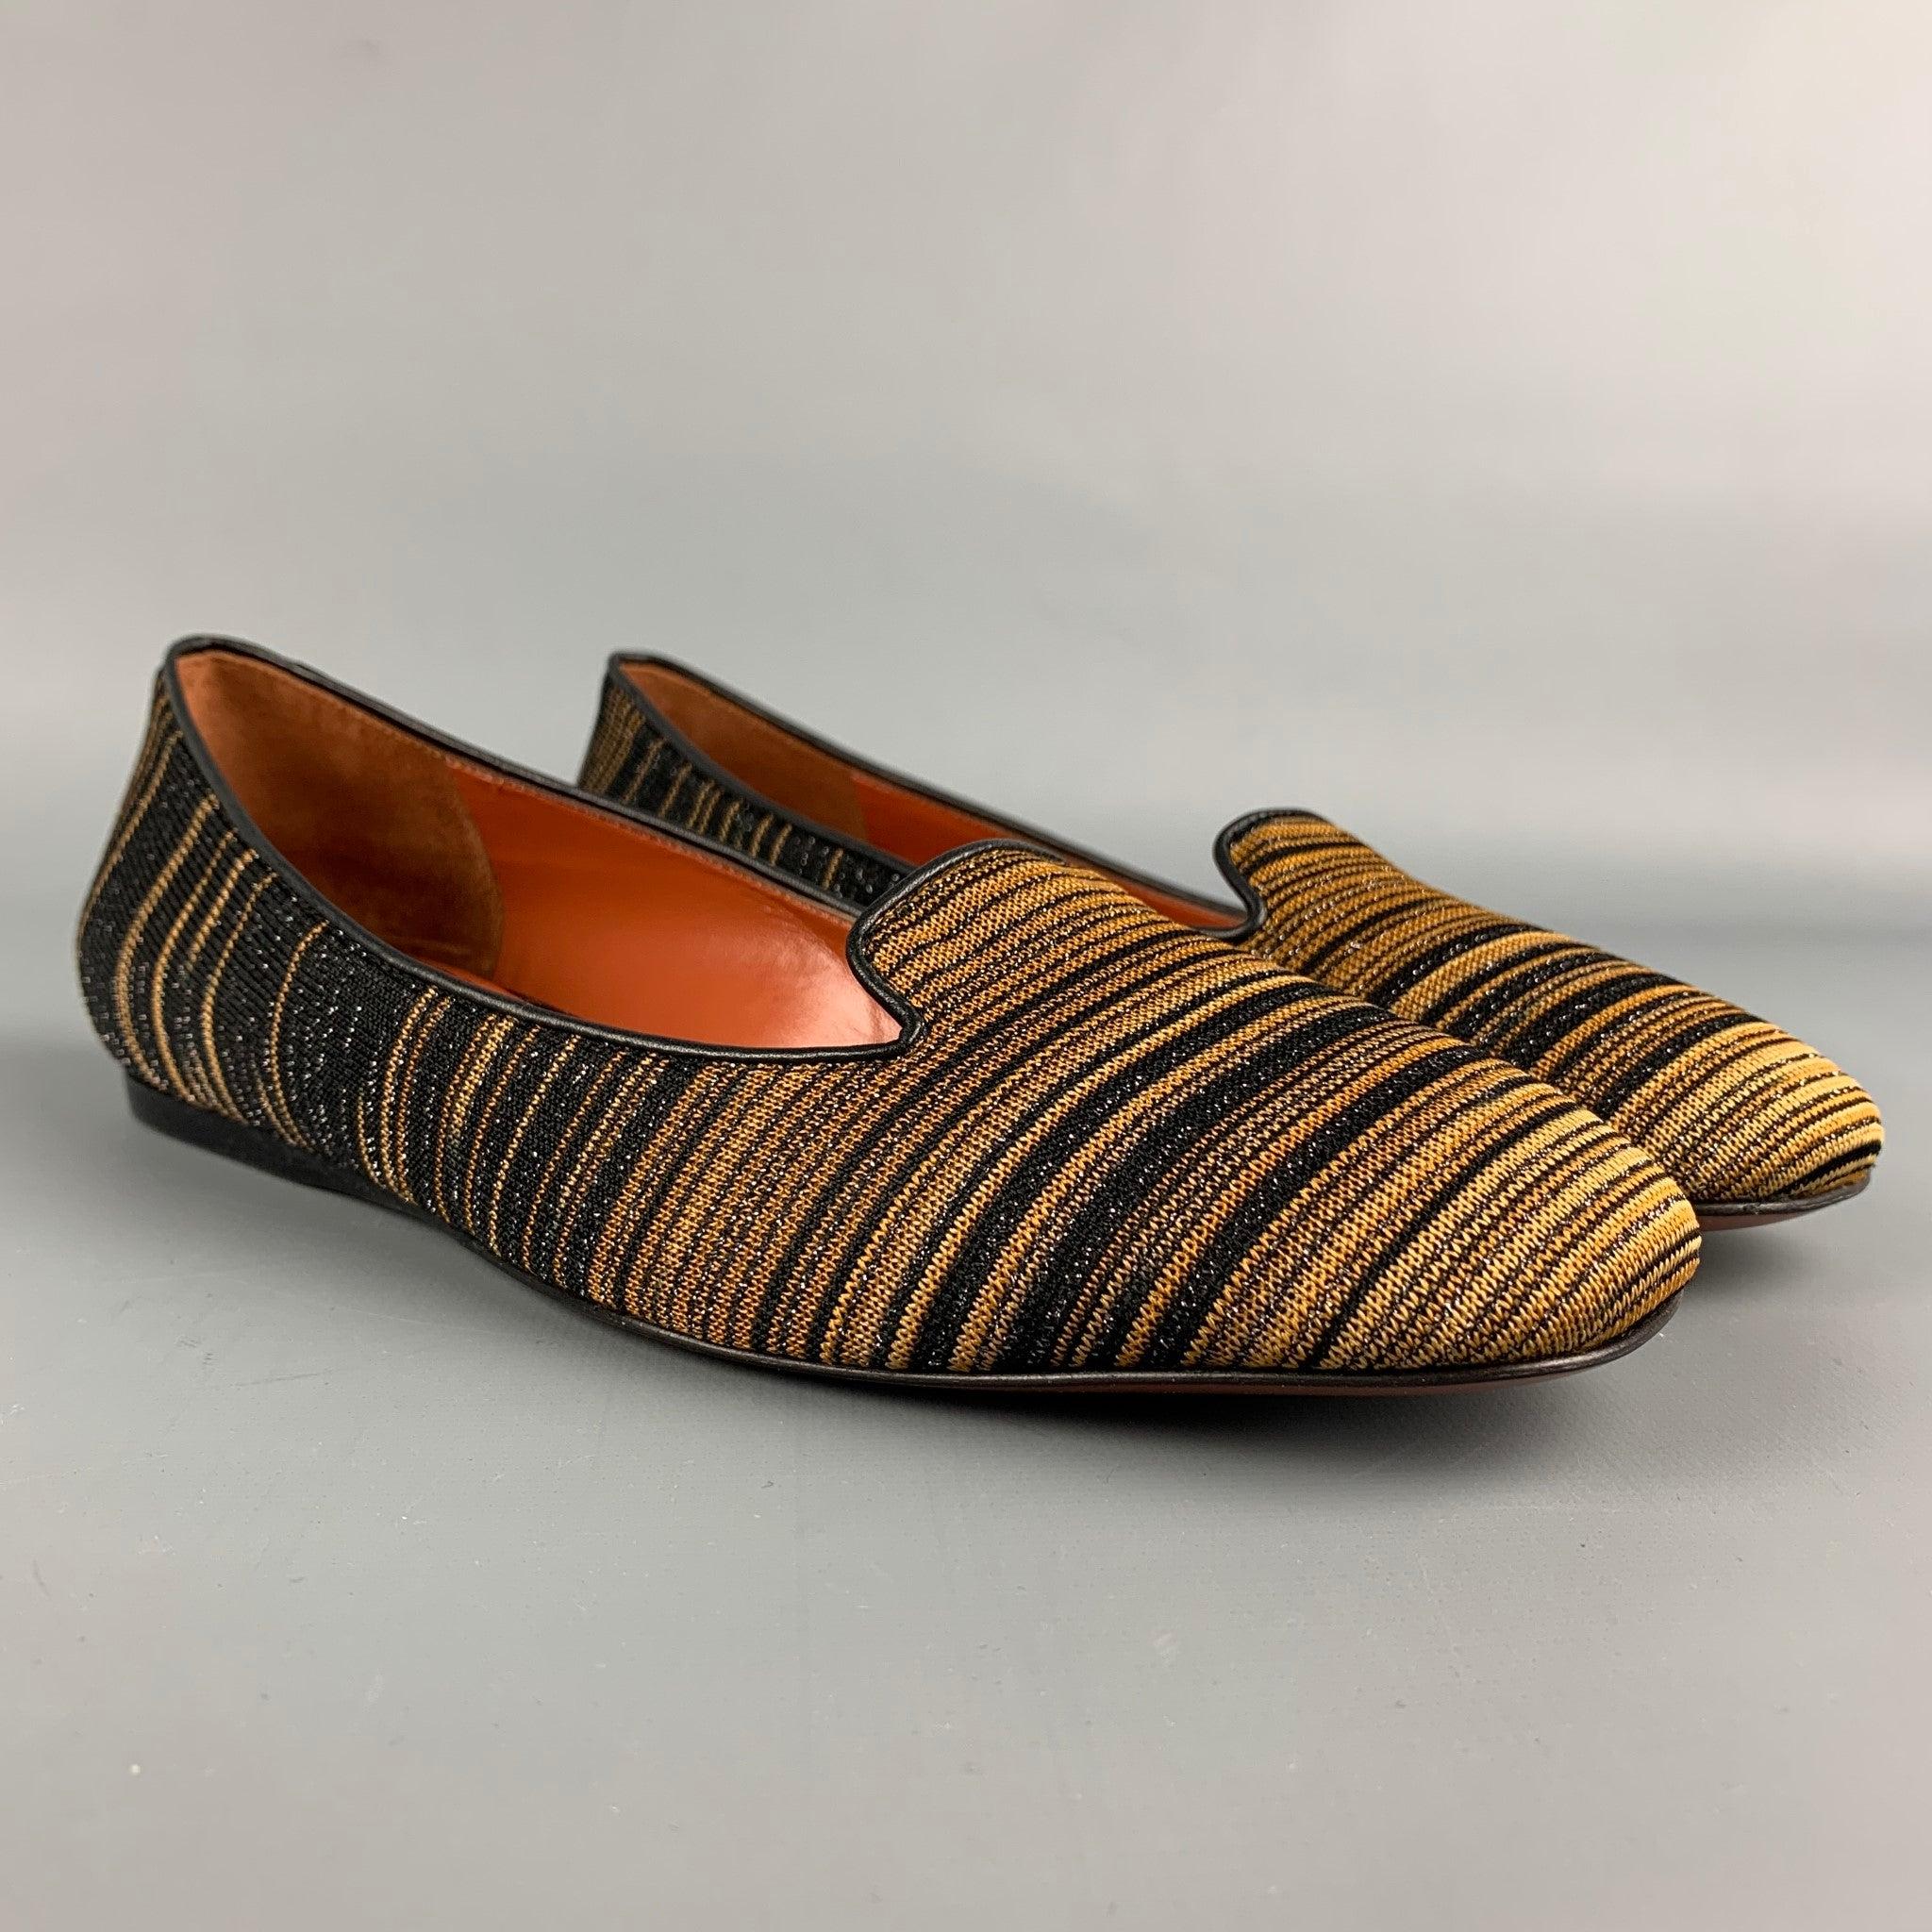 MISSONI flats comes in a black & gold stripe fabric featuring a slip on style. Comes with box. Made in Italy.
 Excellent Pre-Owned Condition. 
 

 Marked:  38Outsole: 3 inches x 9.5 inches  
  
  
  
 Sui Generis Reference: 111437
 Category: Flats
